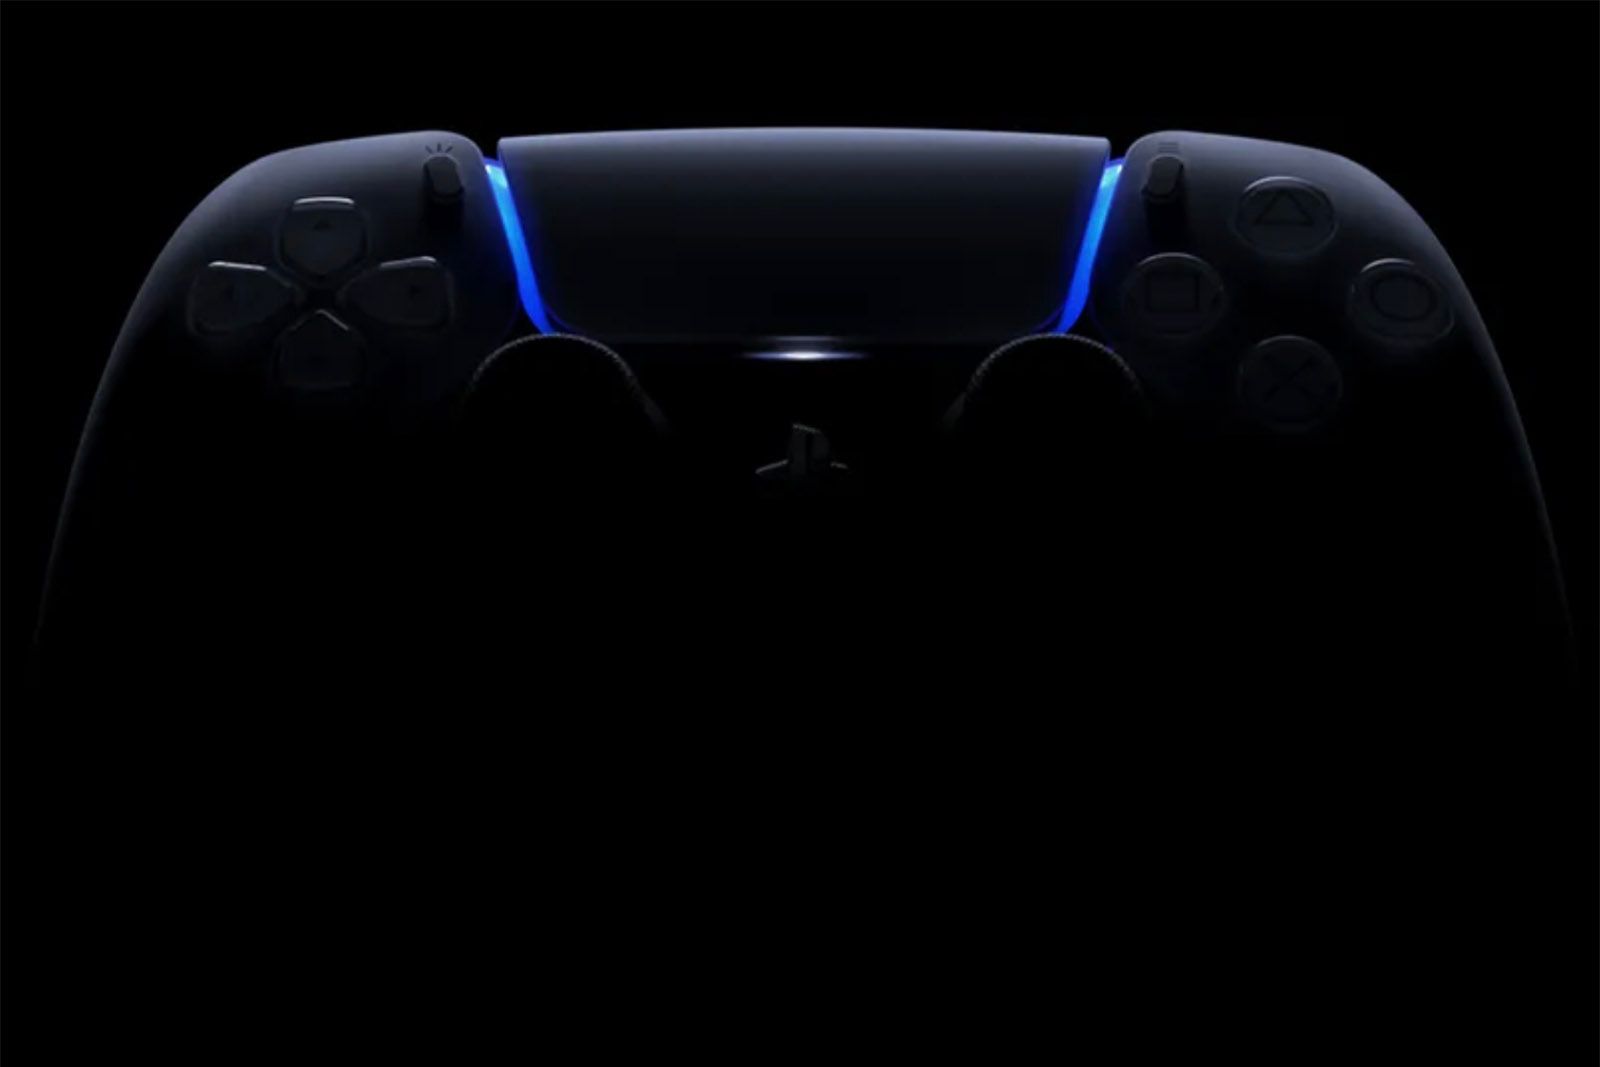 How to watch the PS5 reveal event on 4 June 2020 The Future of Gaming livestream image 1